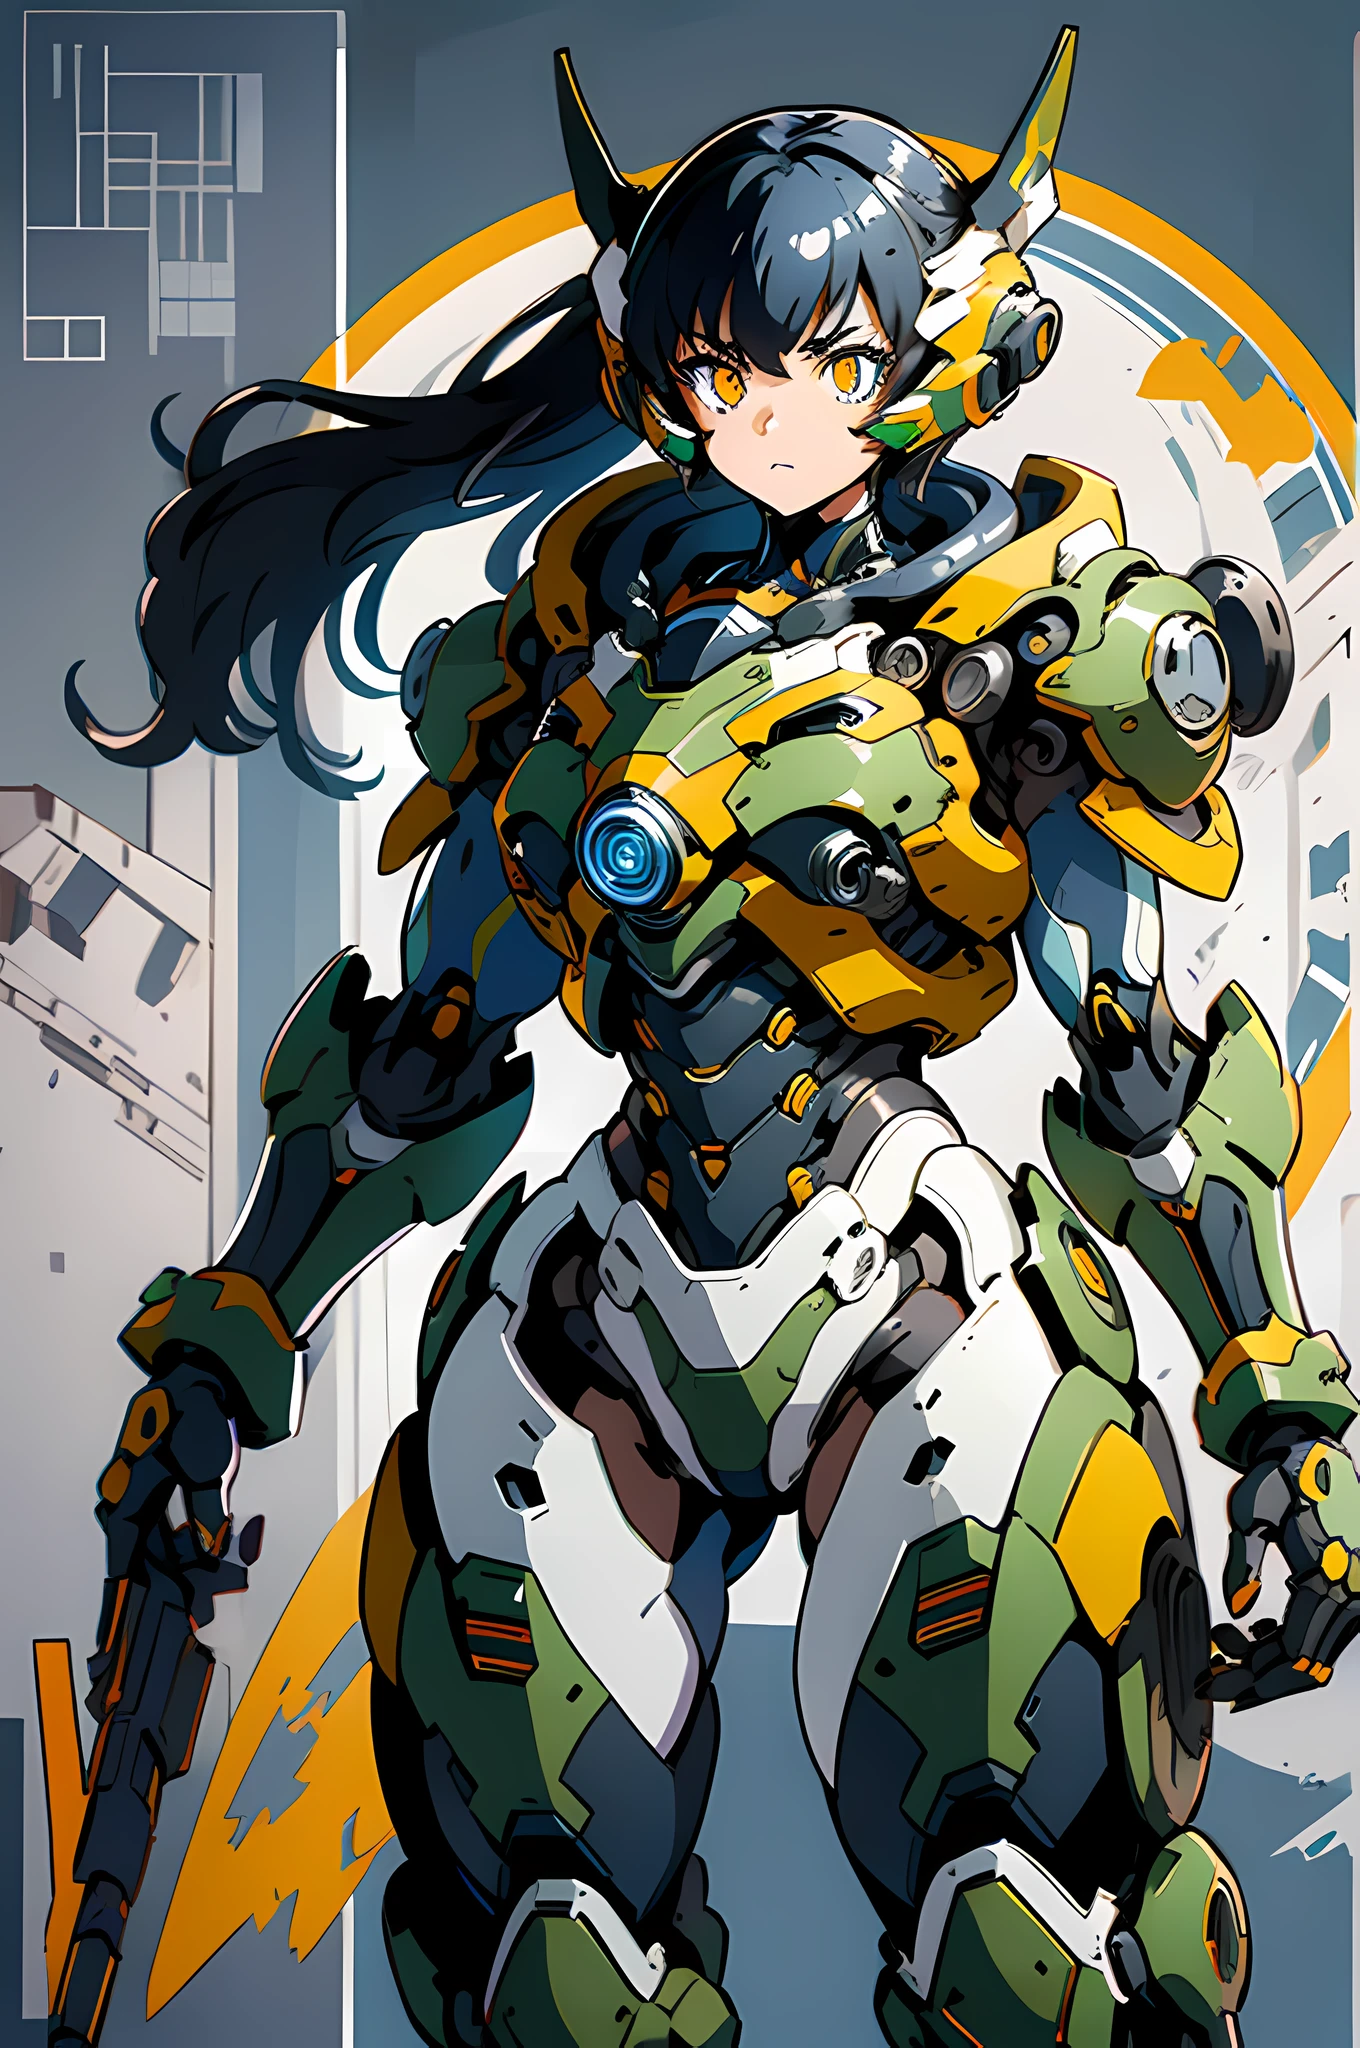 1 girl in mecha suit, glowing eyes, camouflage, concept art running on the battlefield Ink art, flat color, high contrast, fashion Absurd, best quality, negative space,